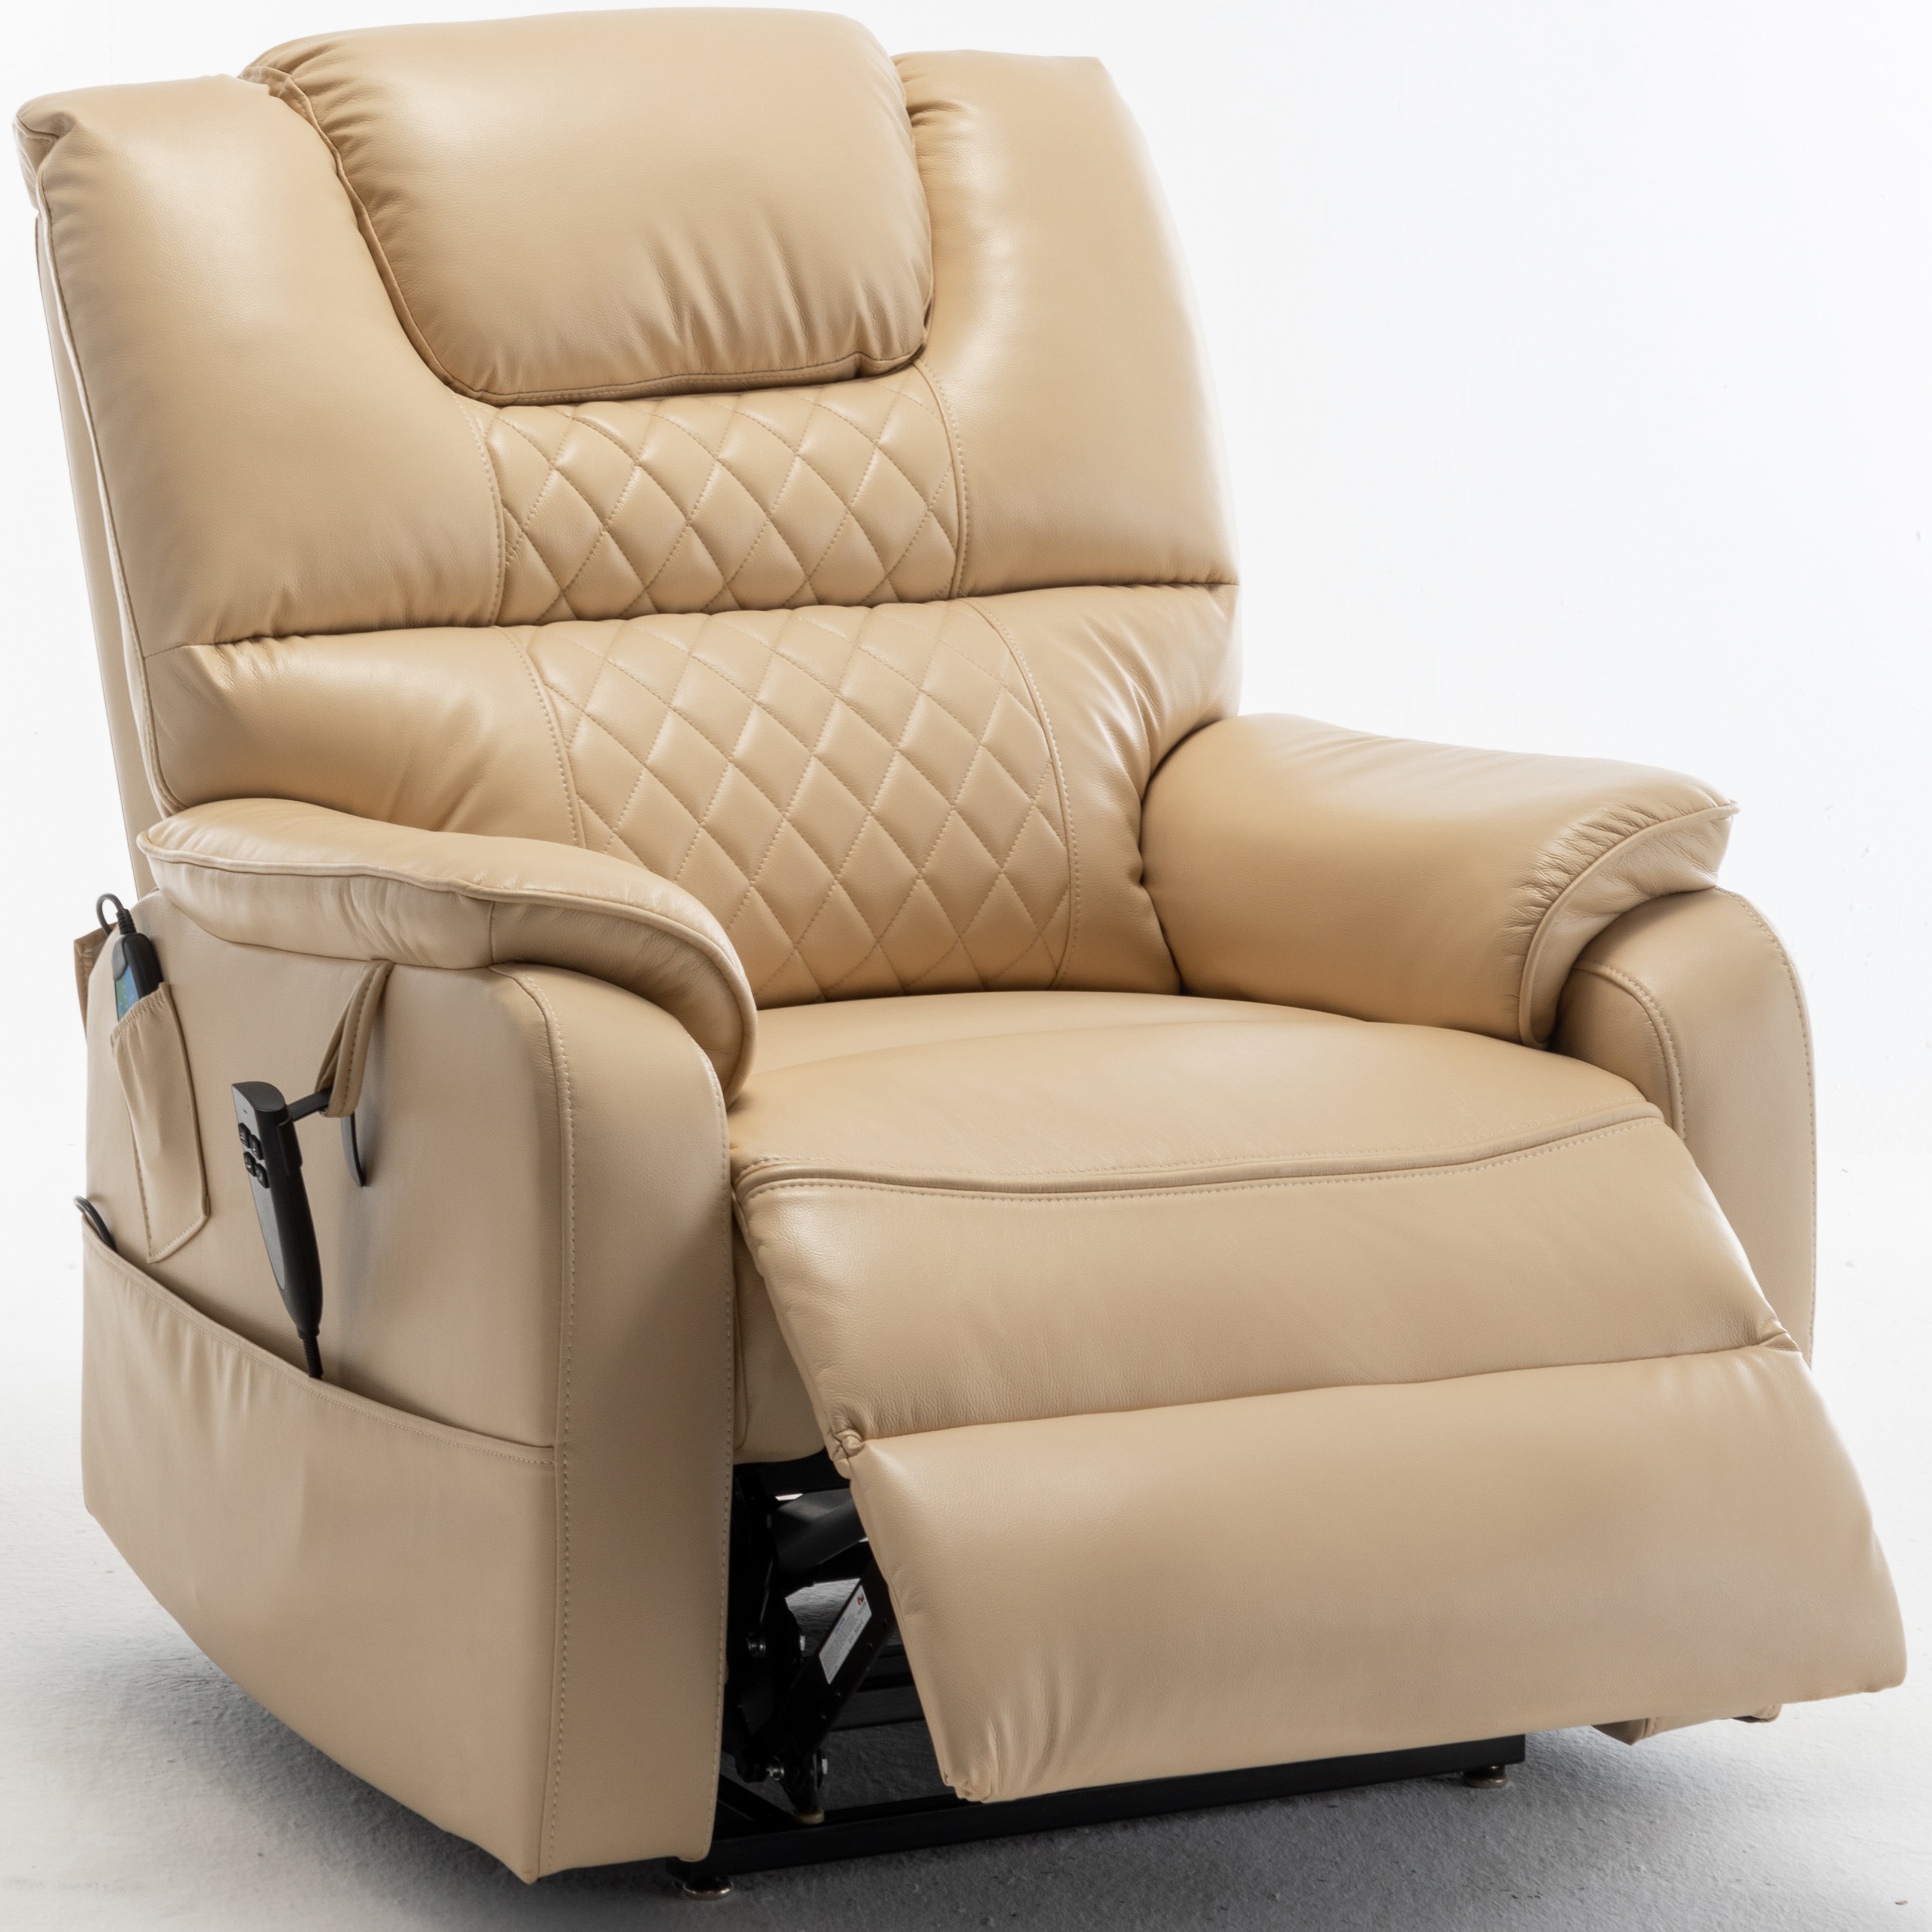 Large Power Lift Recliner Chair for Elderly, Dual OKIN Motor Massage Chair  Recliner with Heat, 180 Degrees Lay Flat Recliner, Beige PU Leather Big Man